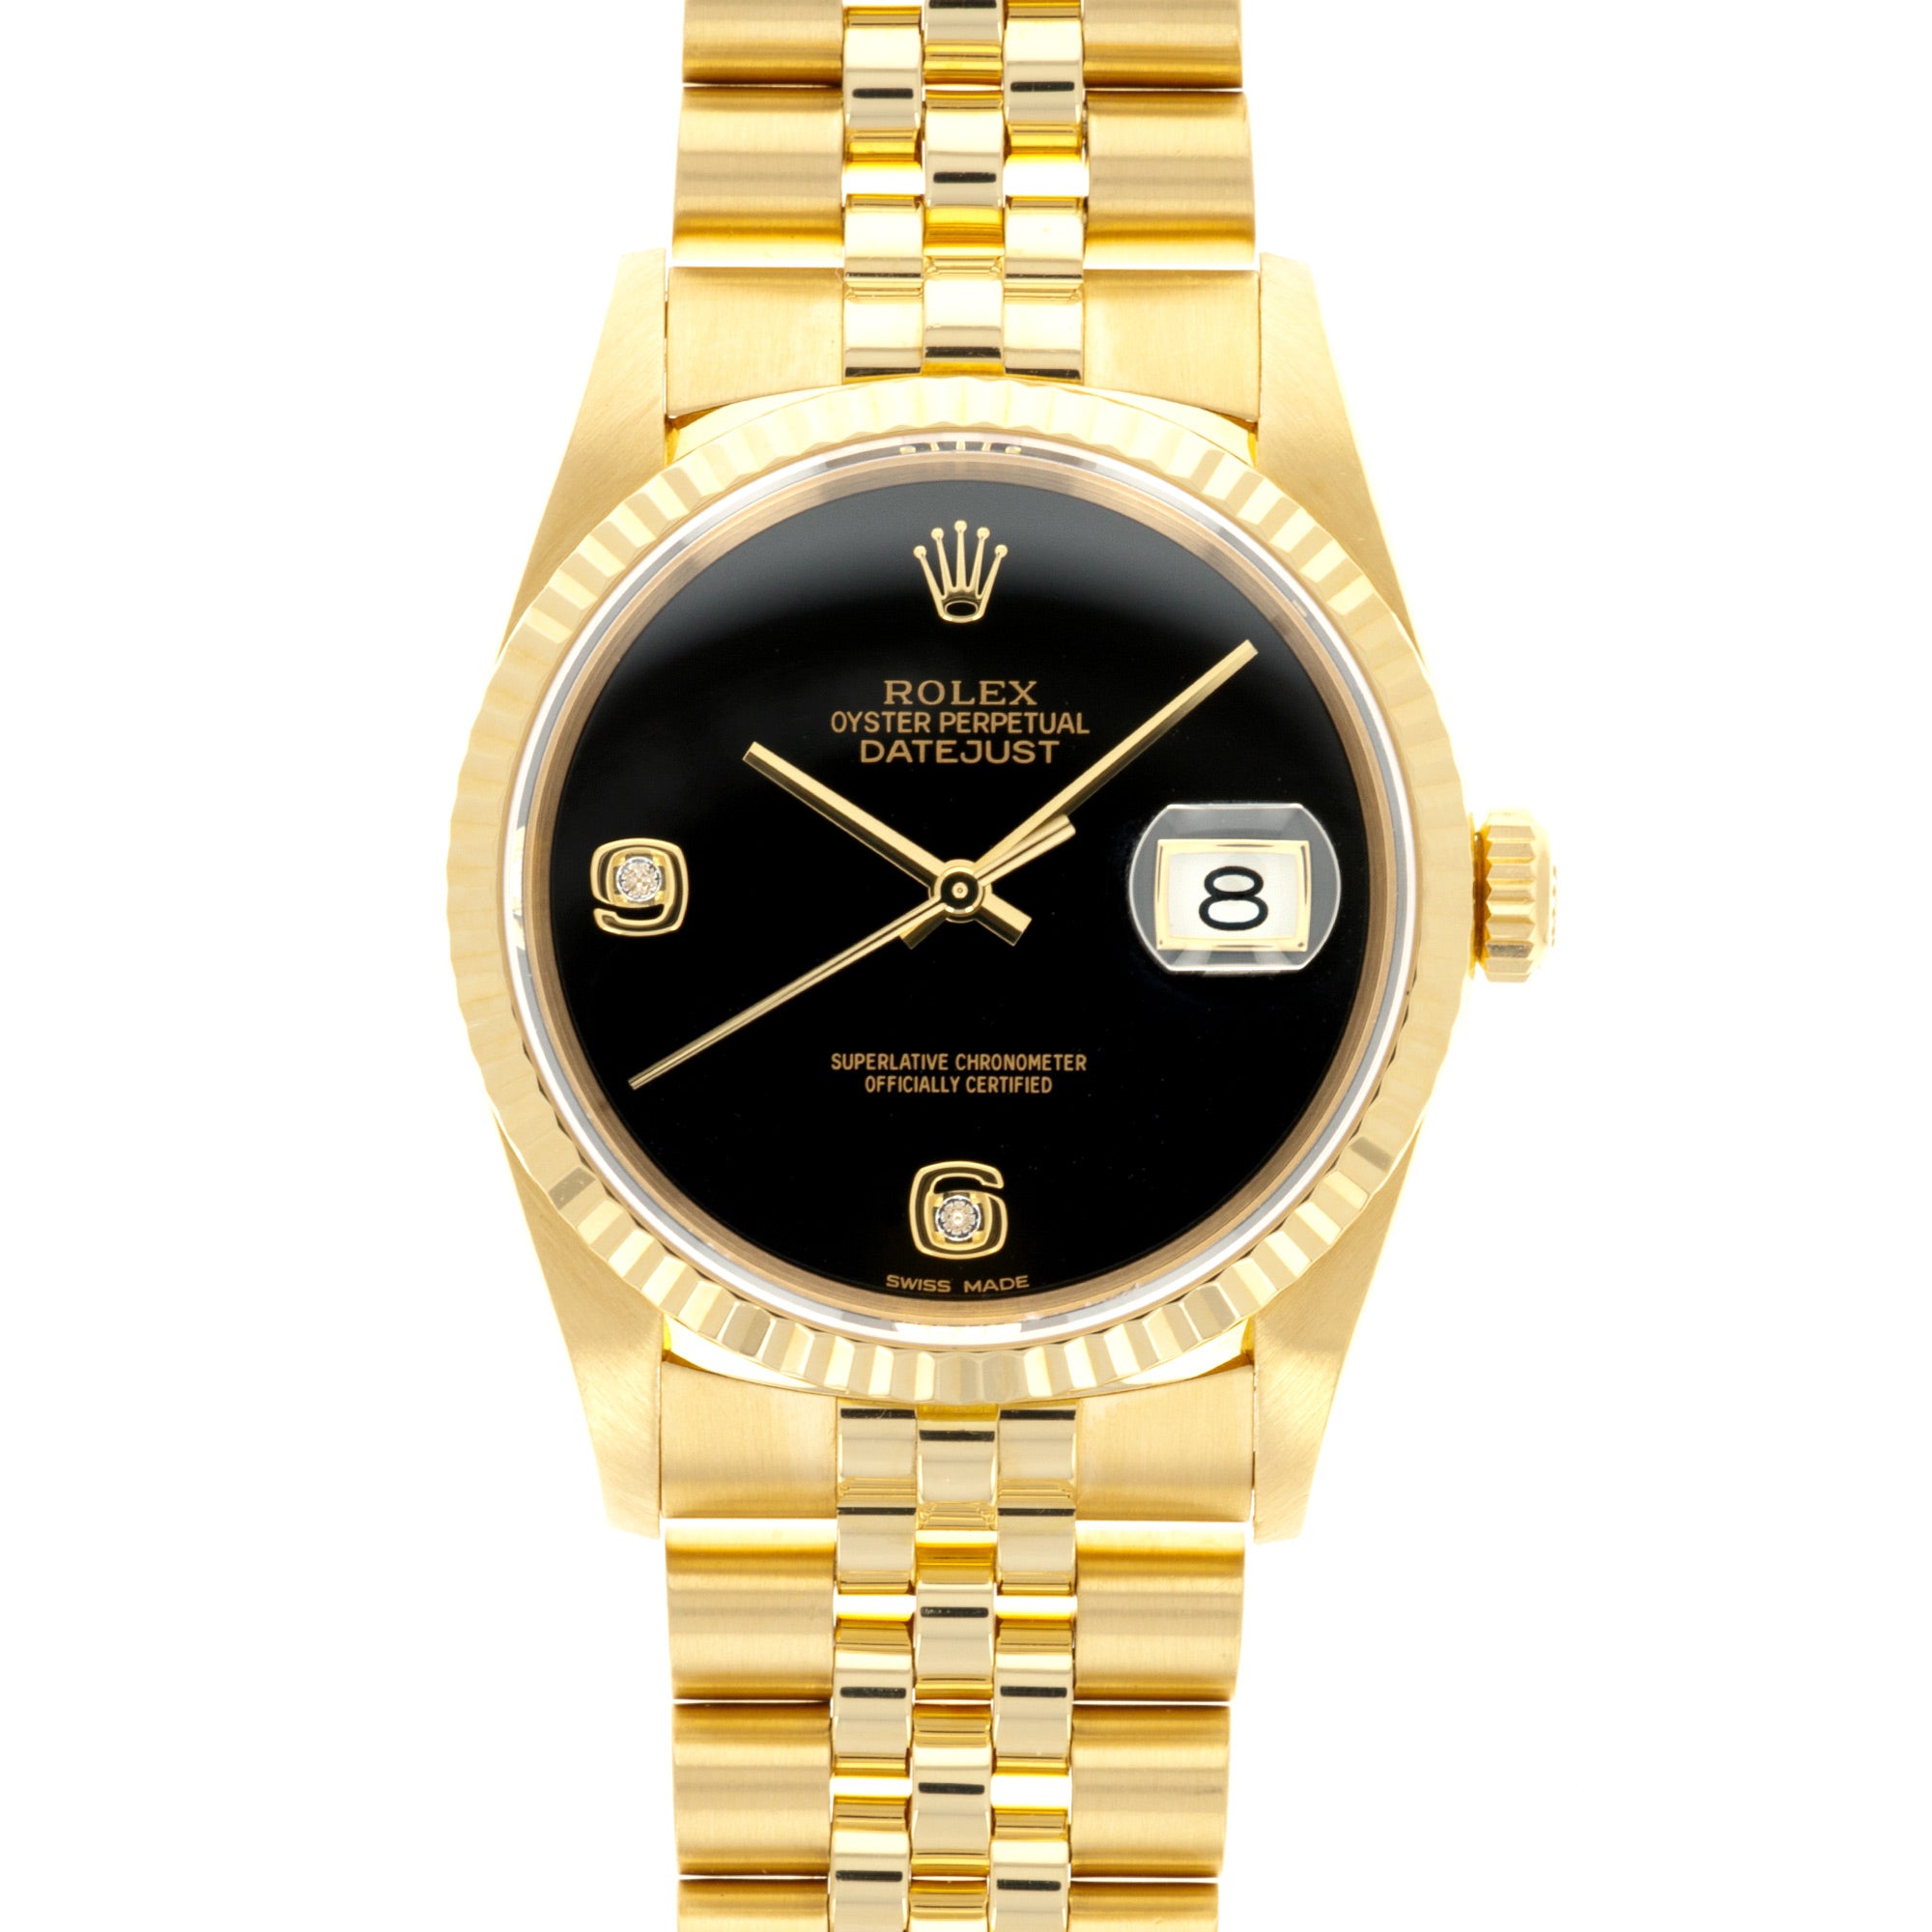 Rolex - Rolex Yellow Gold Datejust Ref. 16238 with Black Onyx Dial - The Keystone Watches